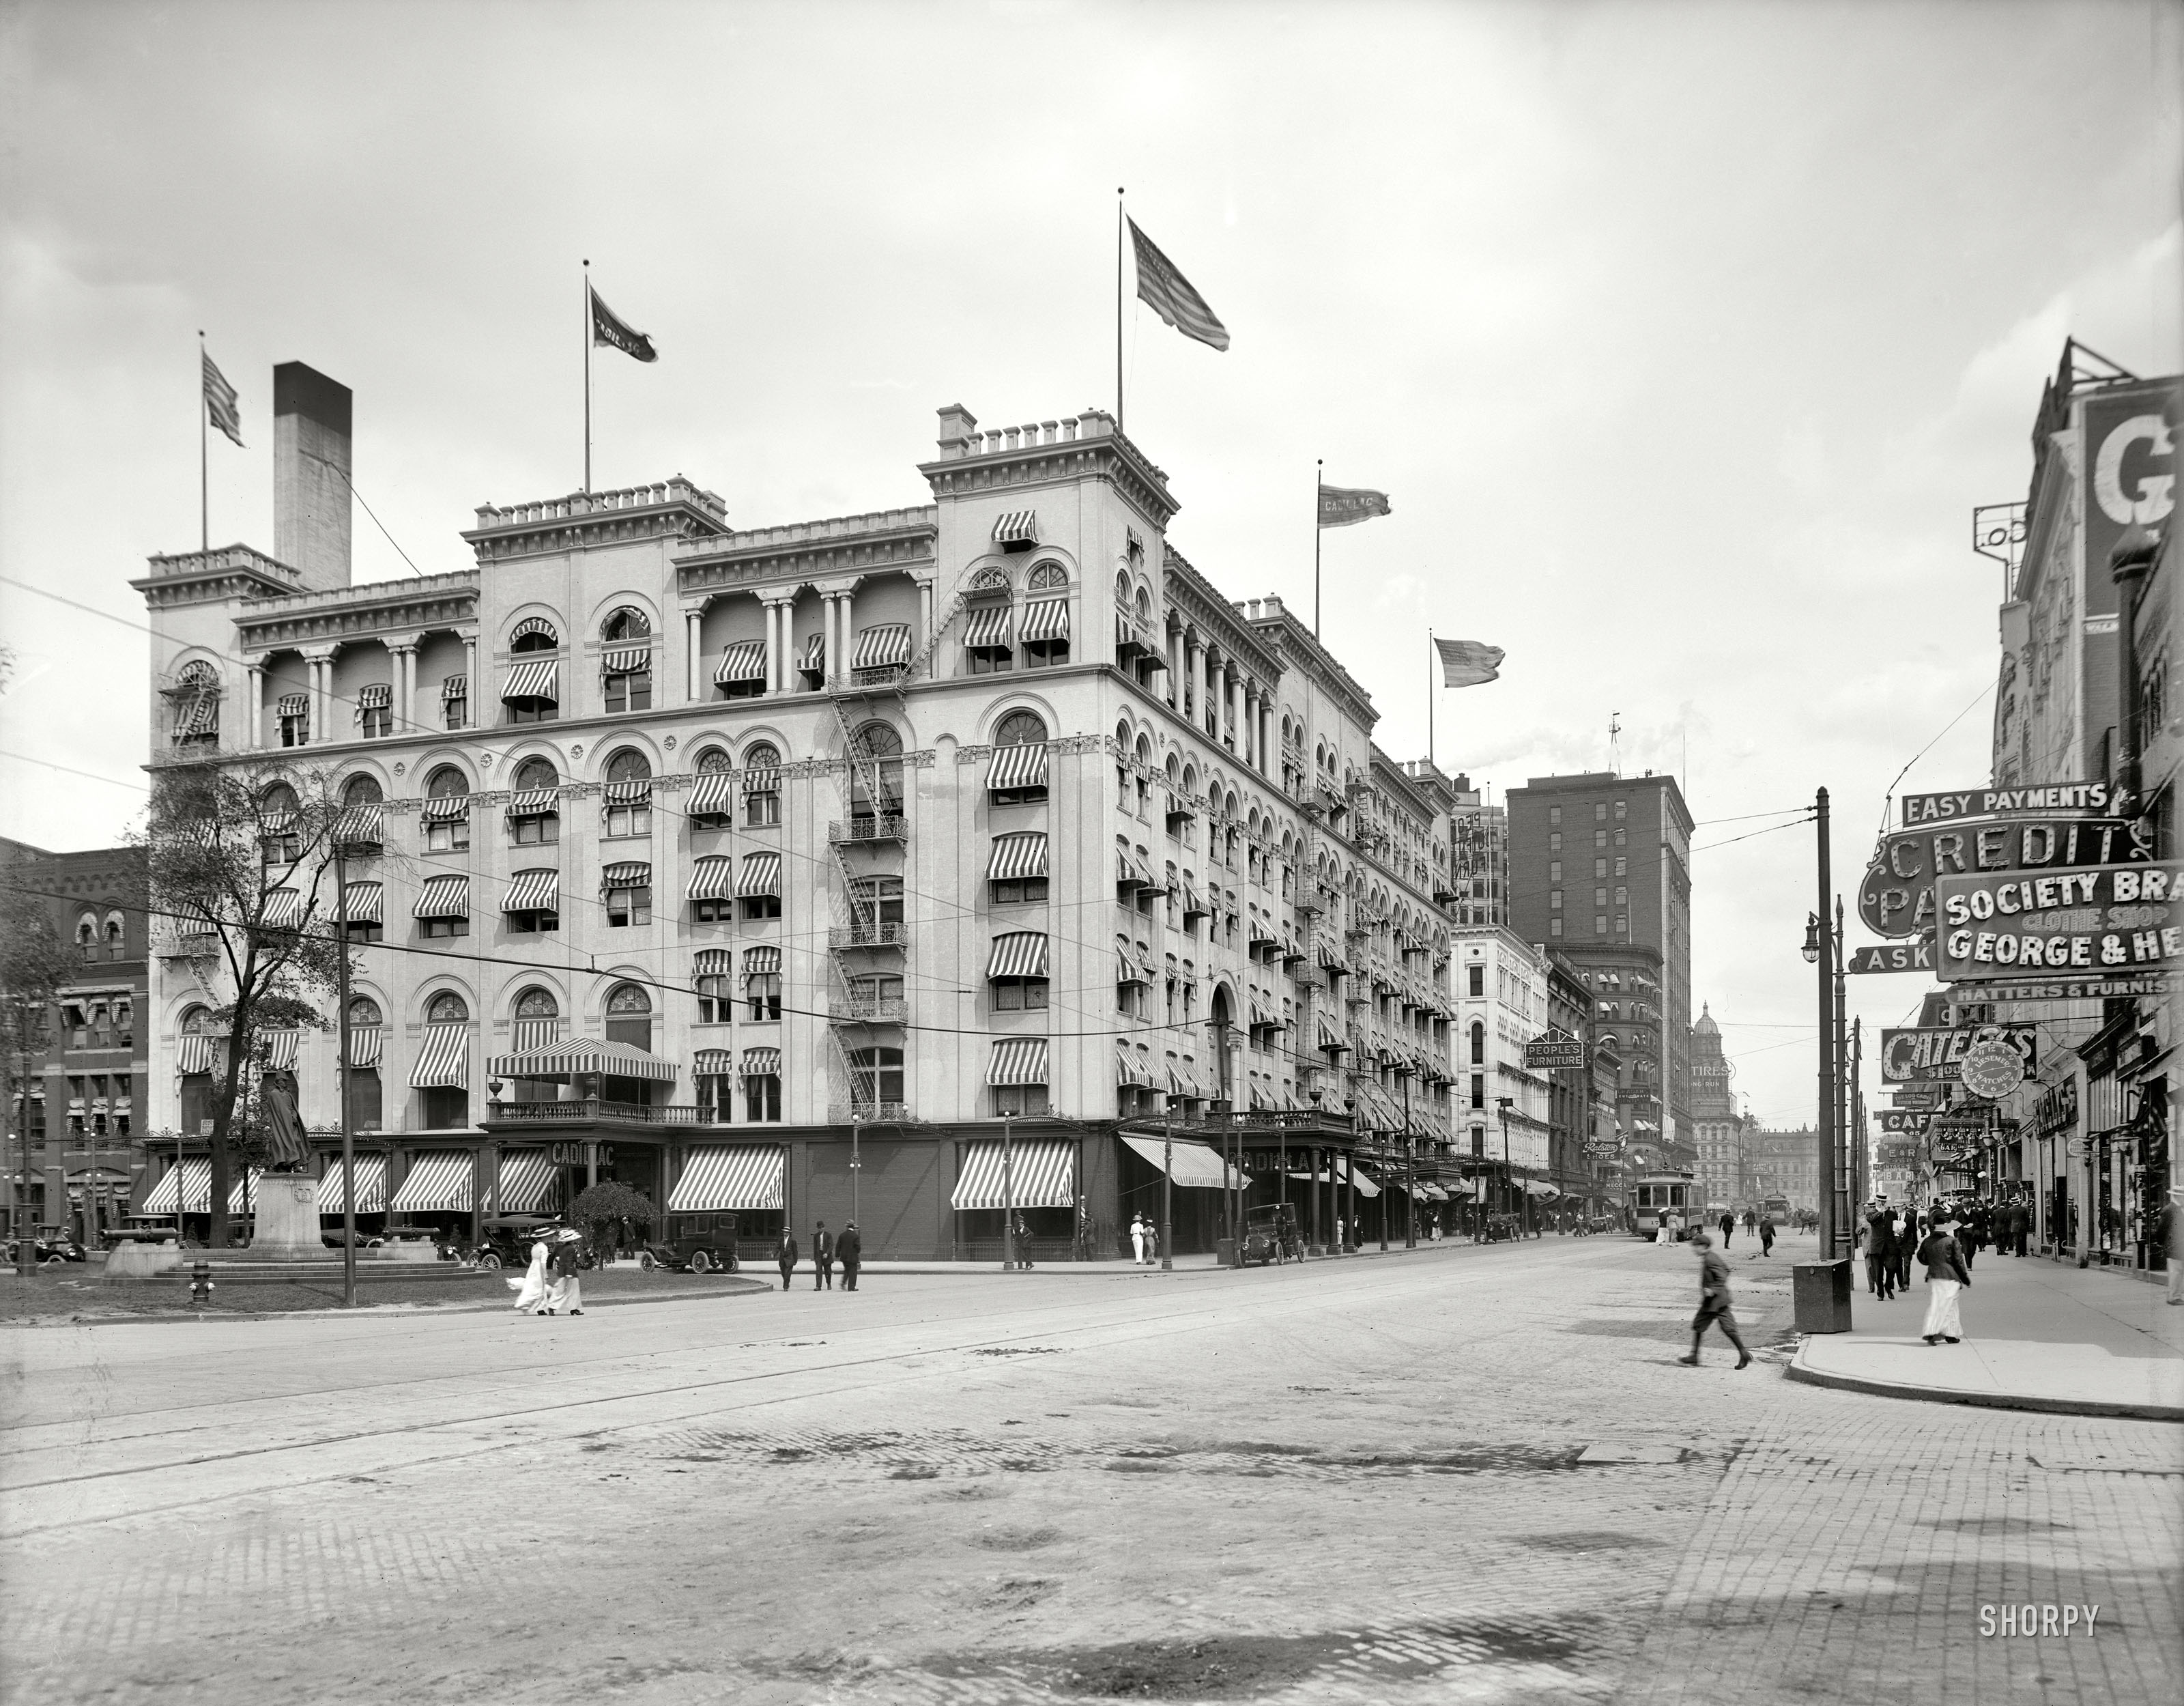 Detroit, Michigan, circa 1914. "Hotel Cadillac." Plus a variation on the 8:17 jeweler's clock sign. 8x10 glass negative, Detroit Publishing Co. View full size.